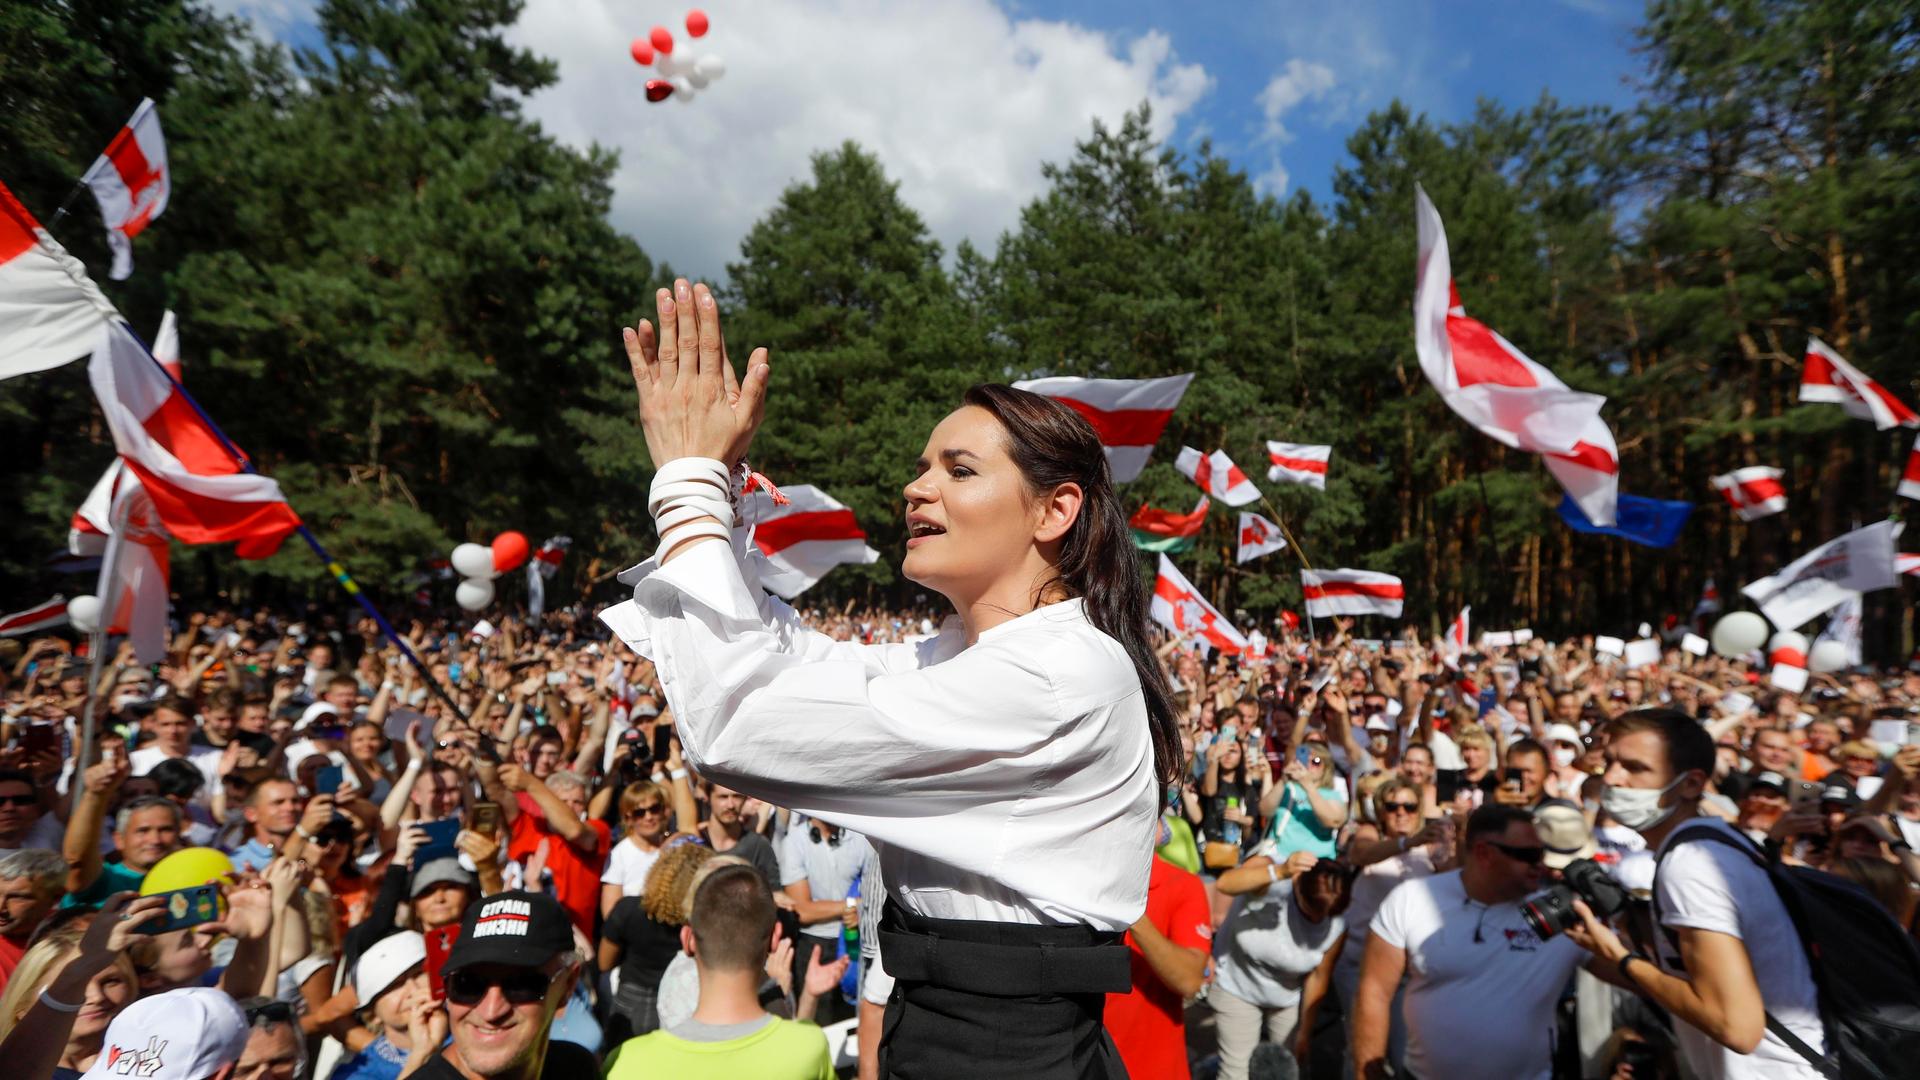 Svetlana Tikhanovskaya, a candidate for the presidential elections in Belarus, greets people during a meeting in her support in Brest, Belarus, Aug. 2, 2020.